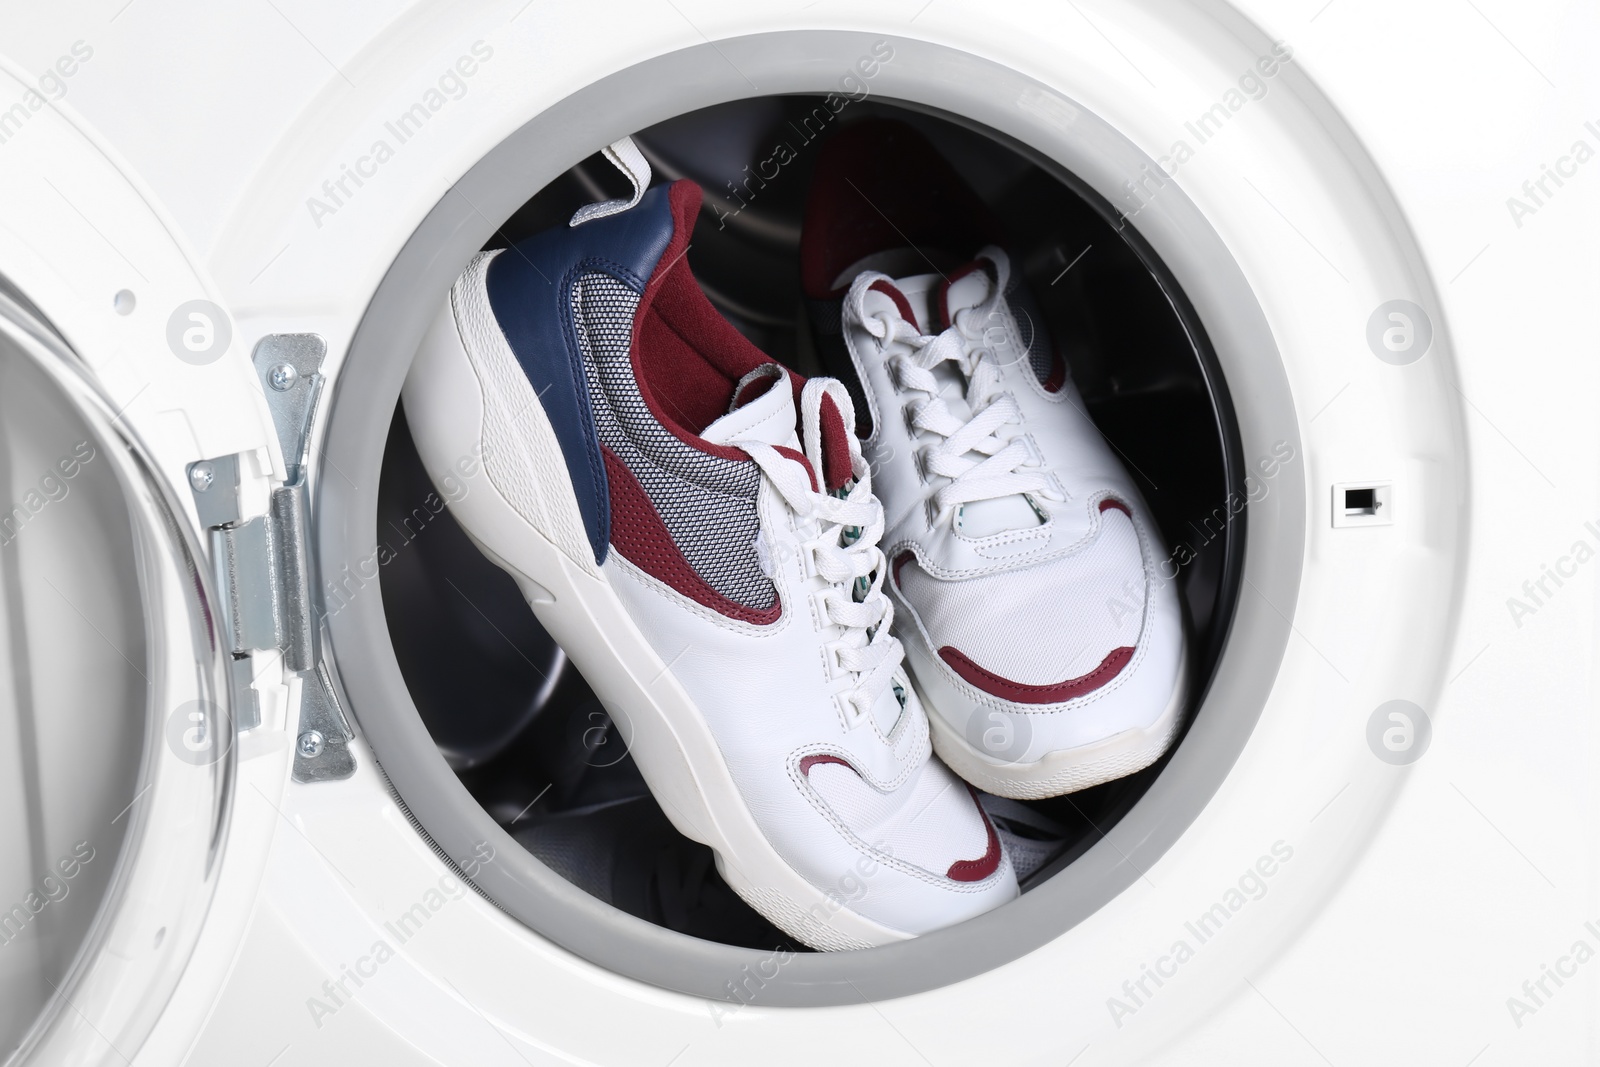 Photo of Clean sport shoes in washing machine drum